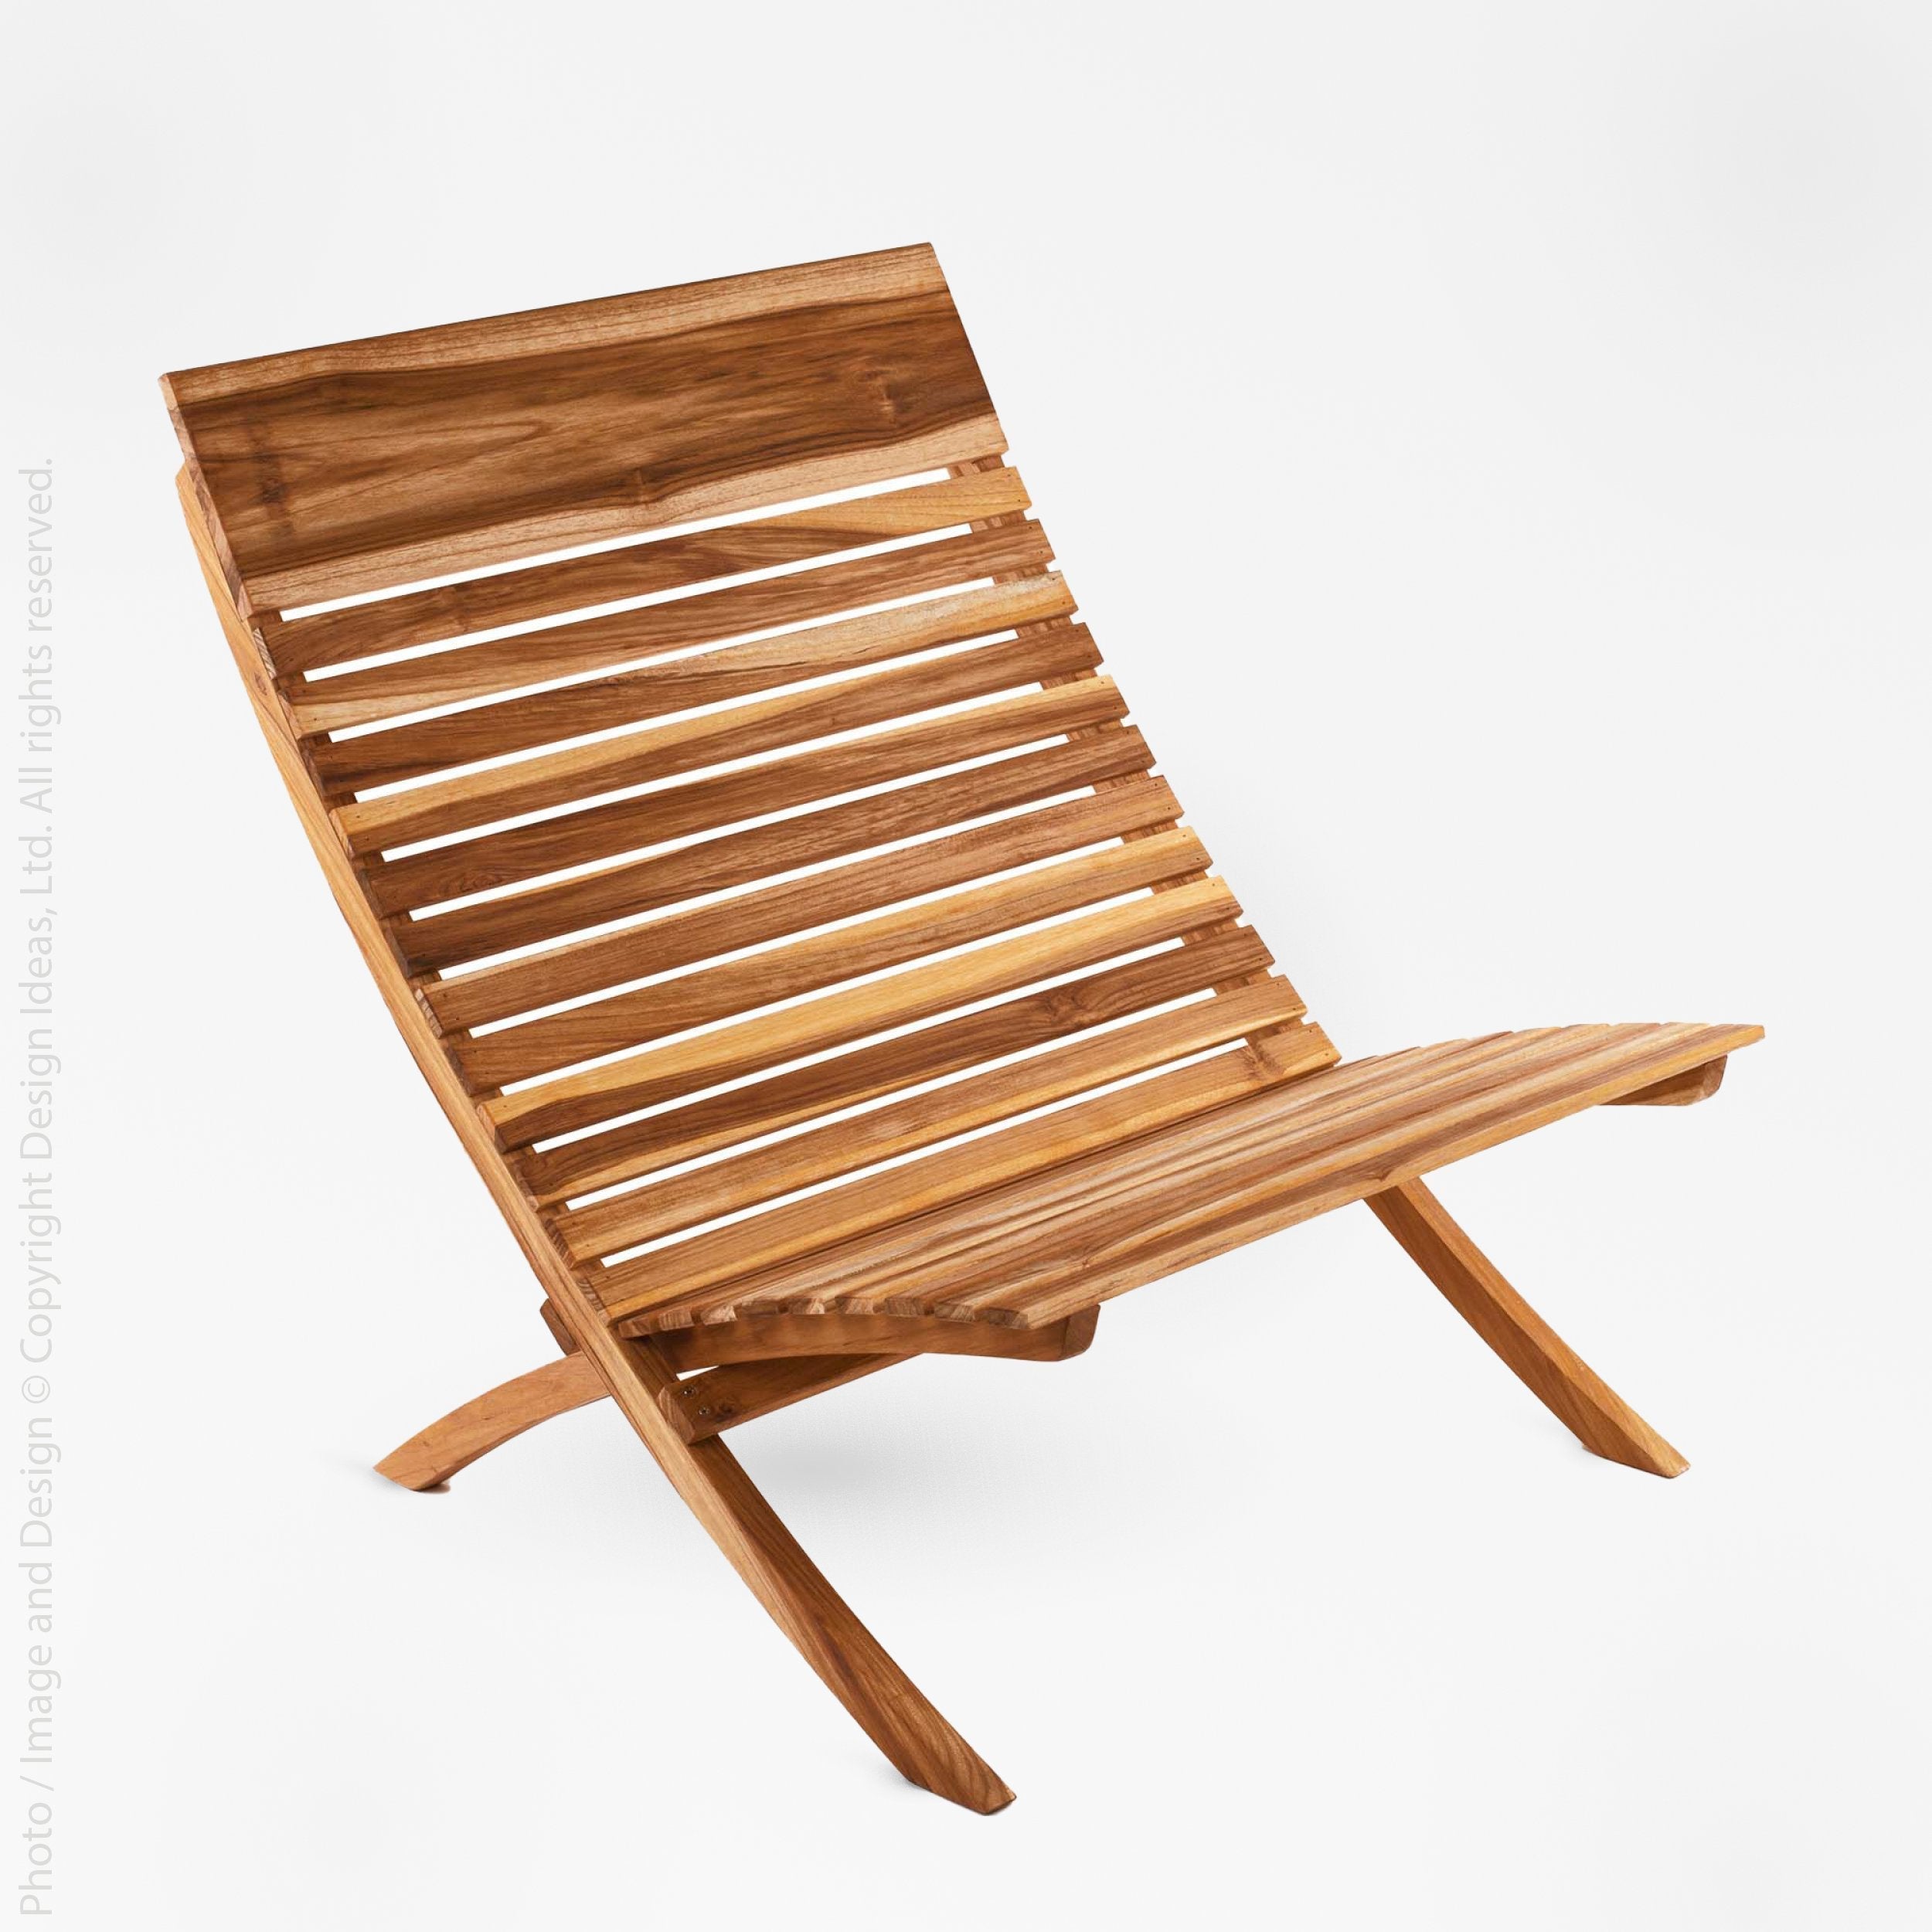 Barcelona Teak Beach Chair - white color | Image 1 | From the Barcelona Collection | Masterfully assembled with natural teak for long lasting use | This chair is sustainably sourced | Available in natural color | texxture home